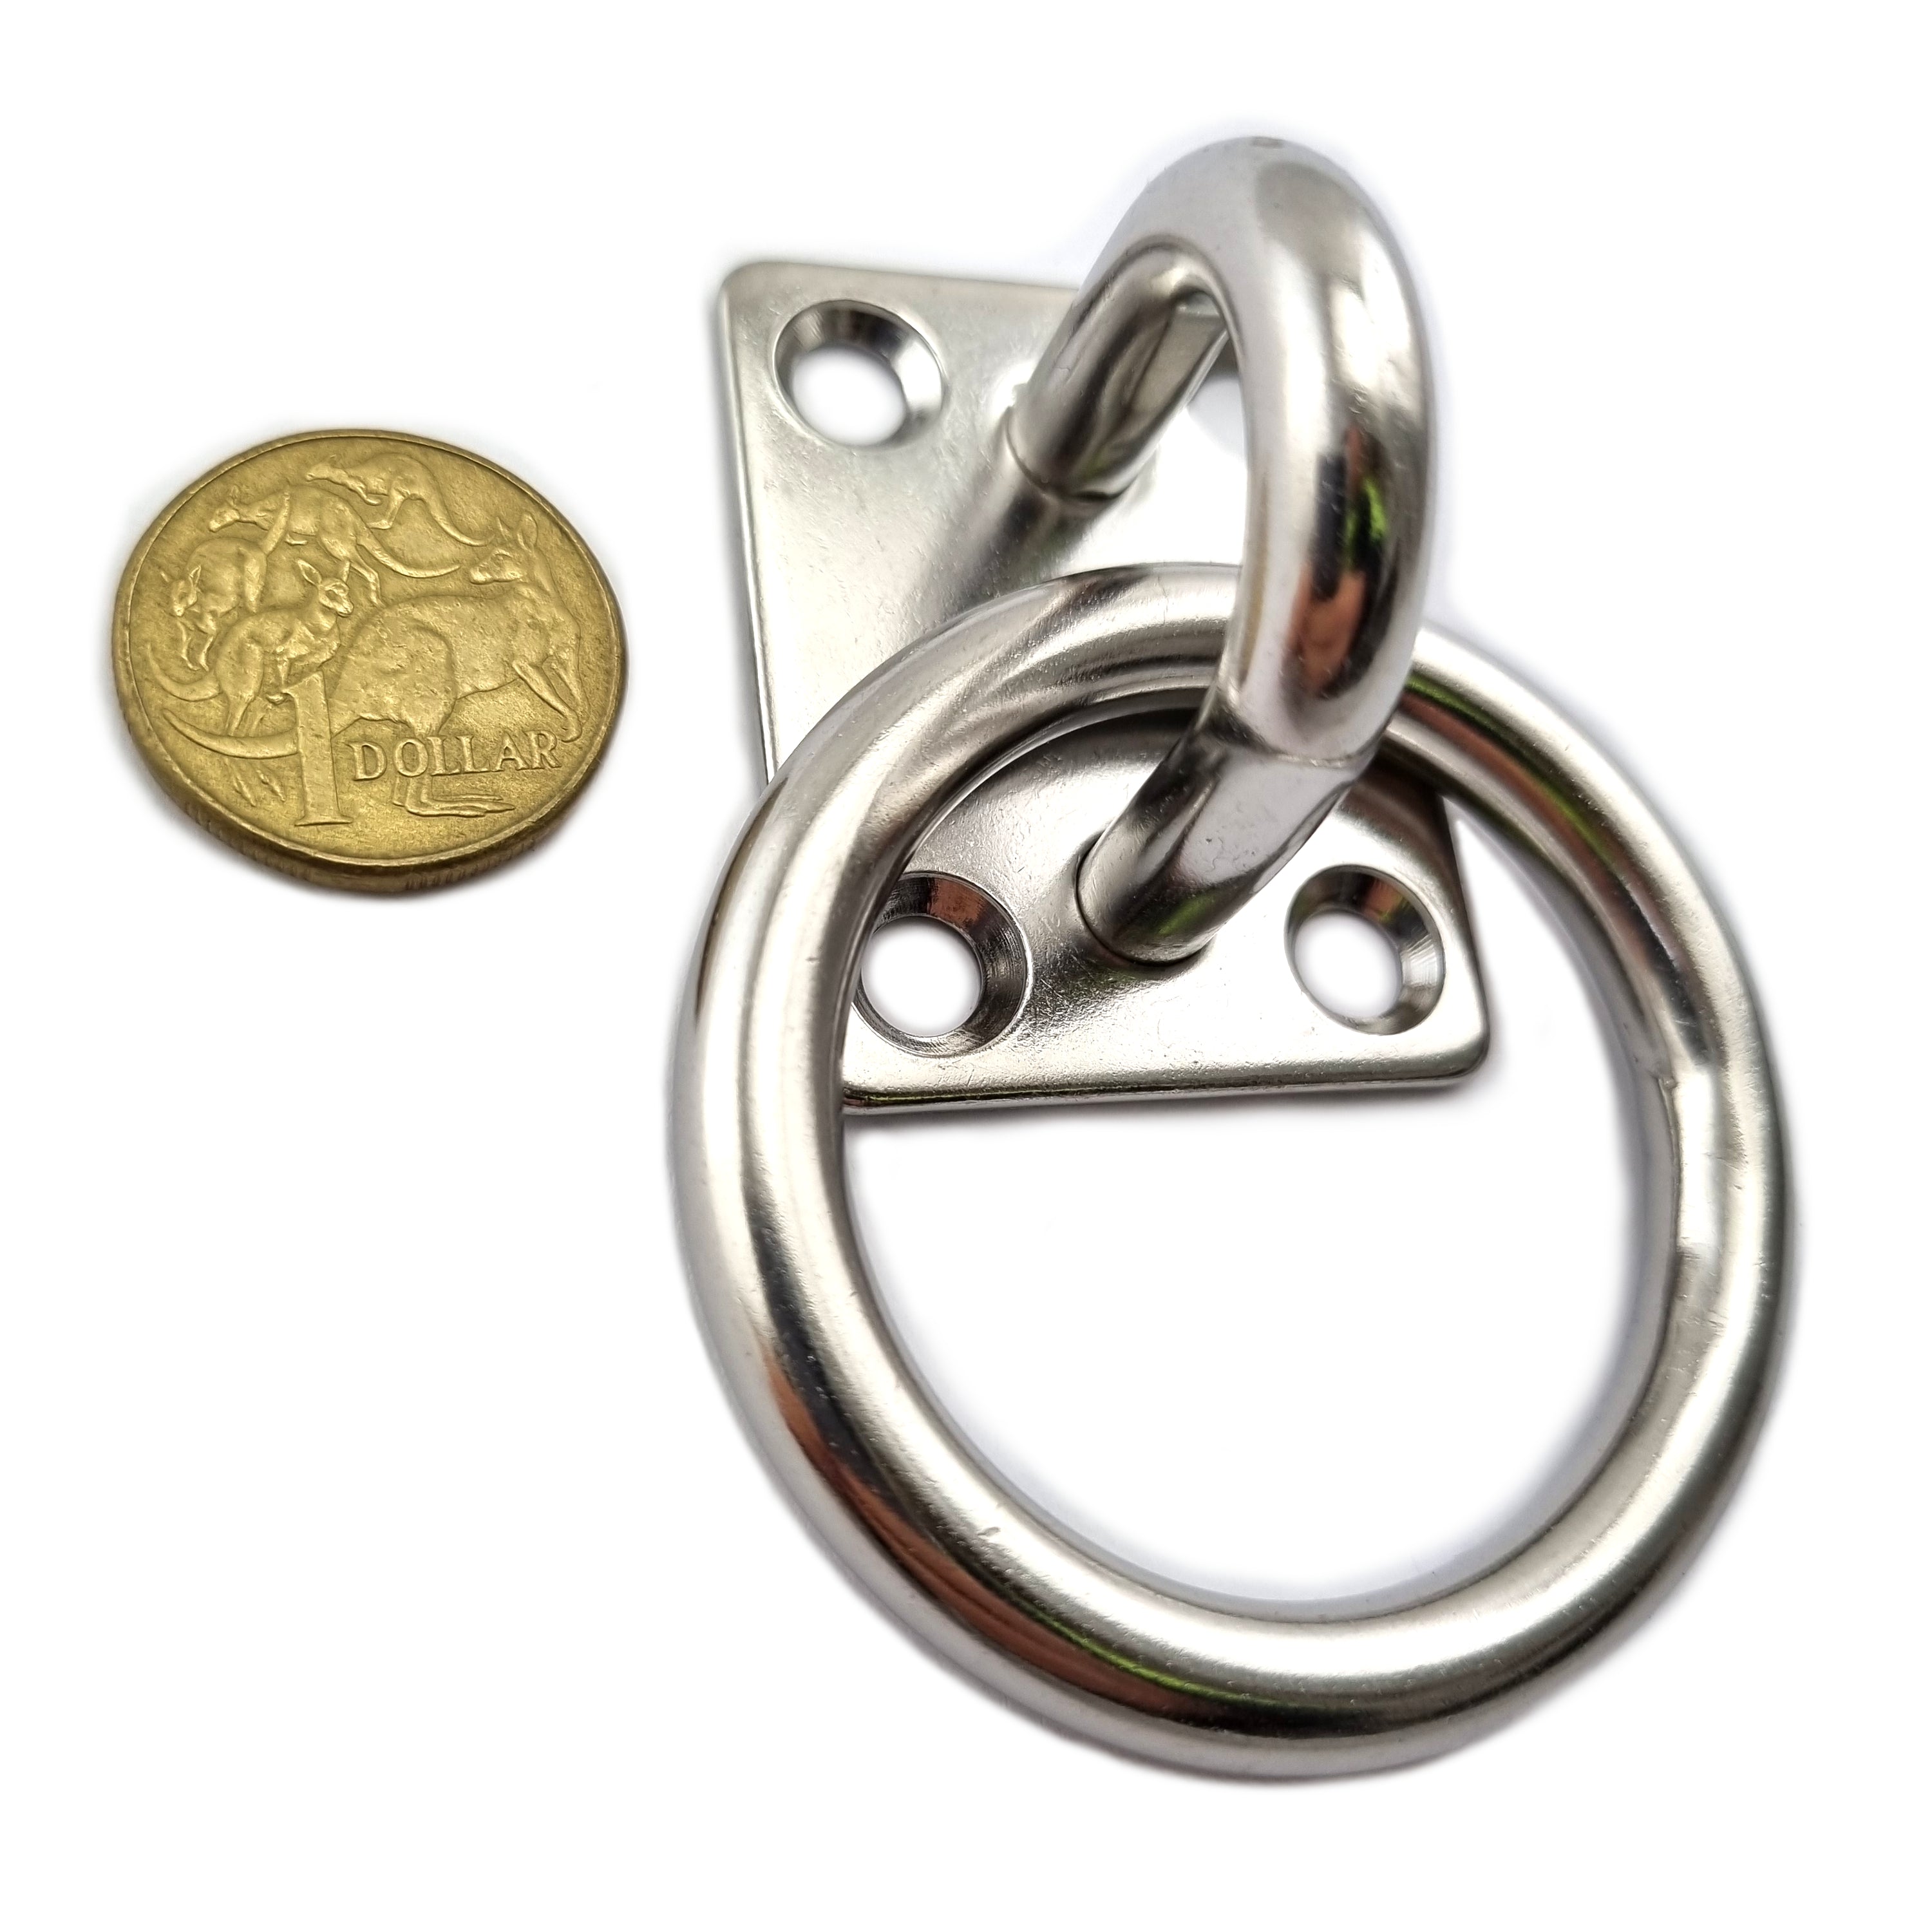 8mm Eye Plate with ring in type 316 marine grade stainless steel. Shop hardware chain.com.au